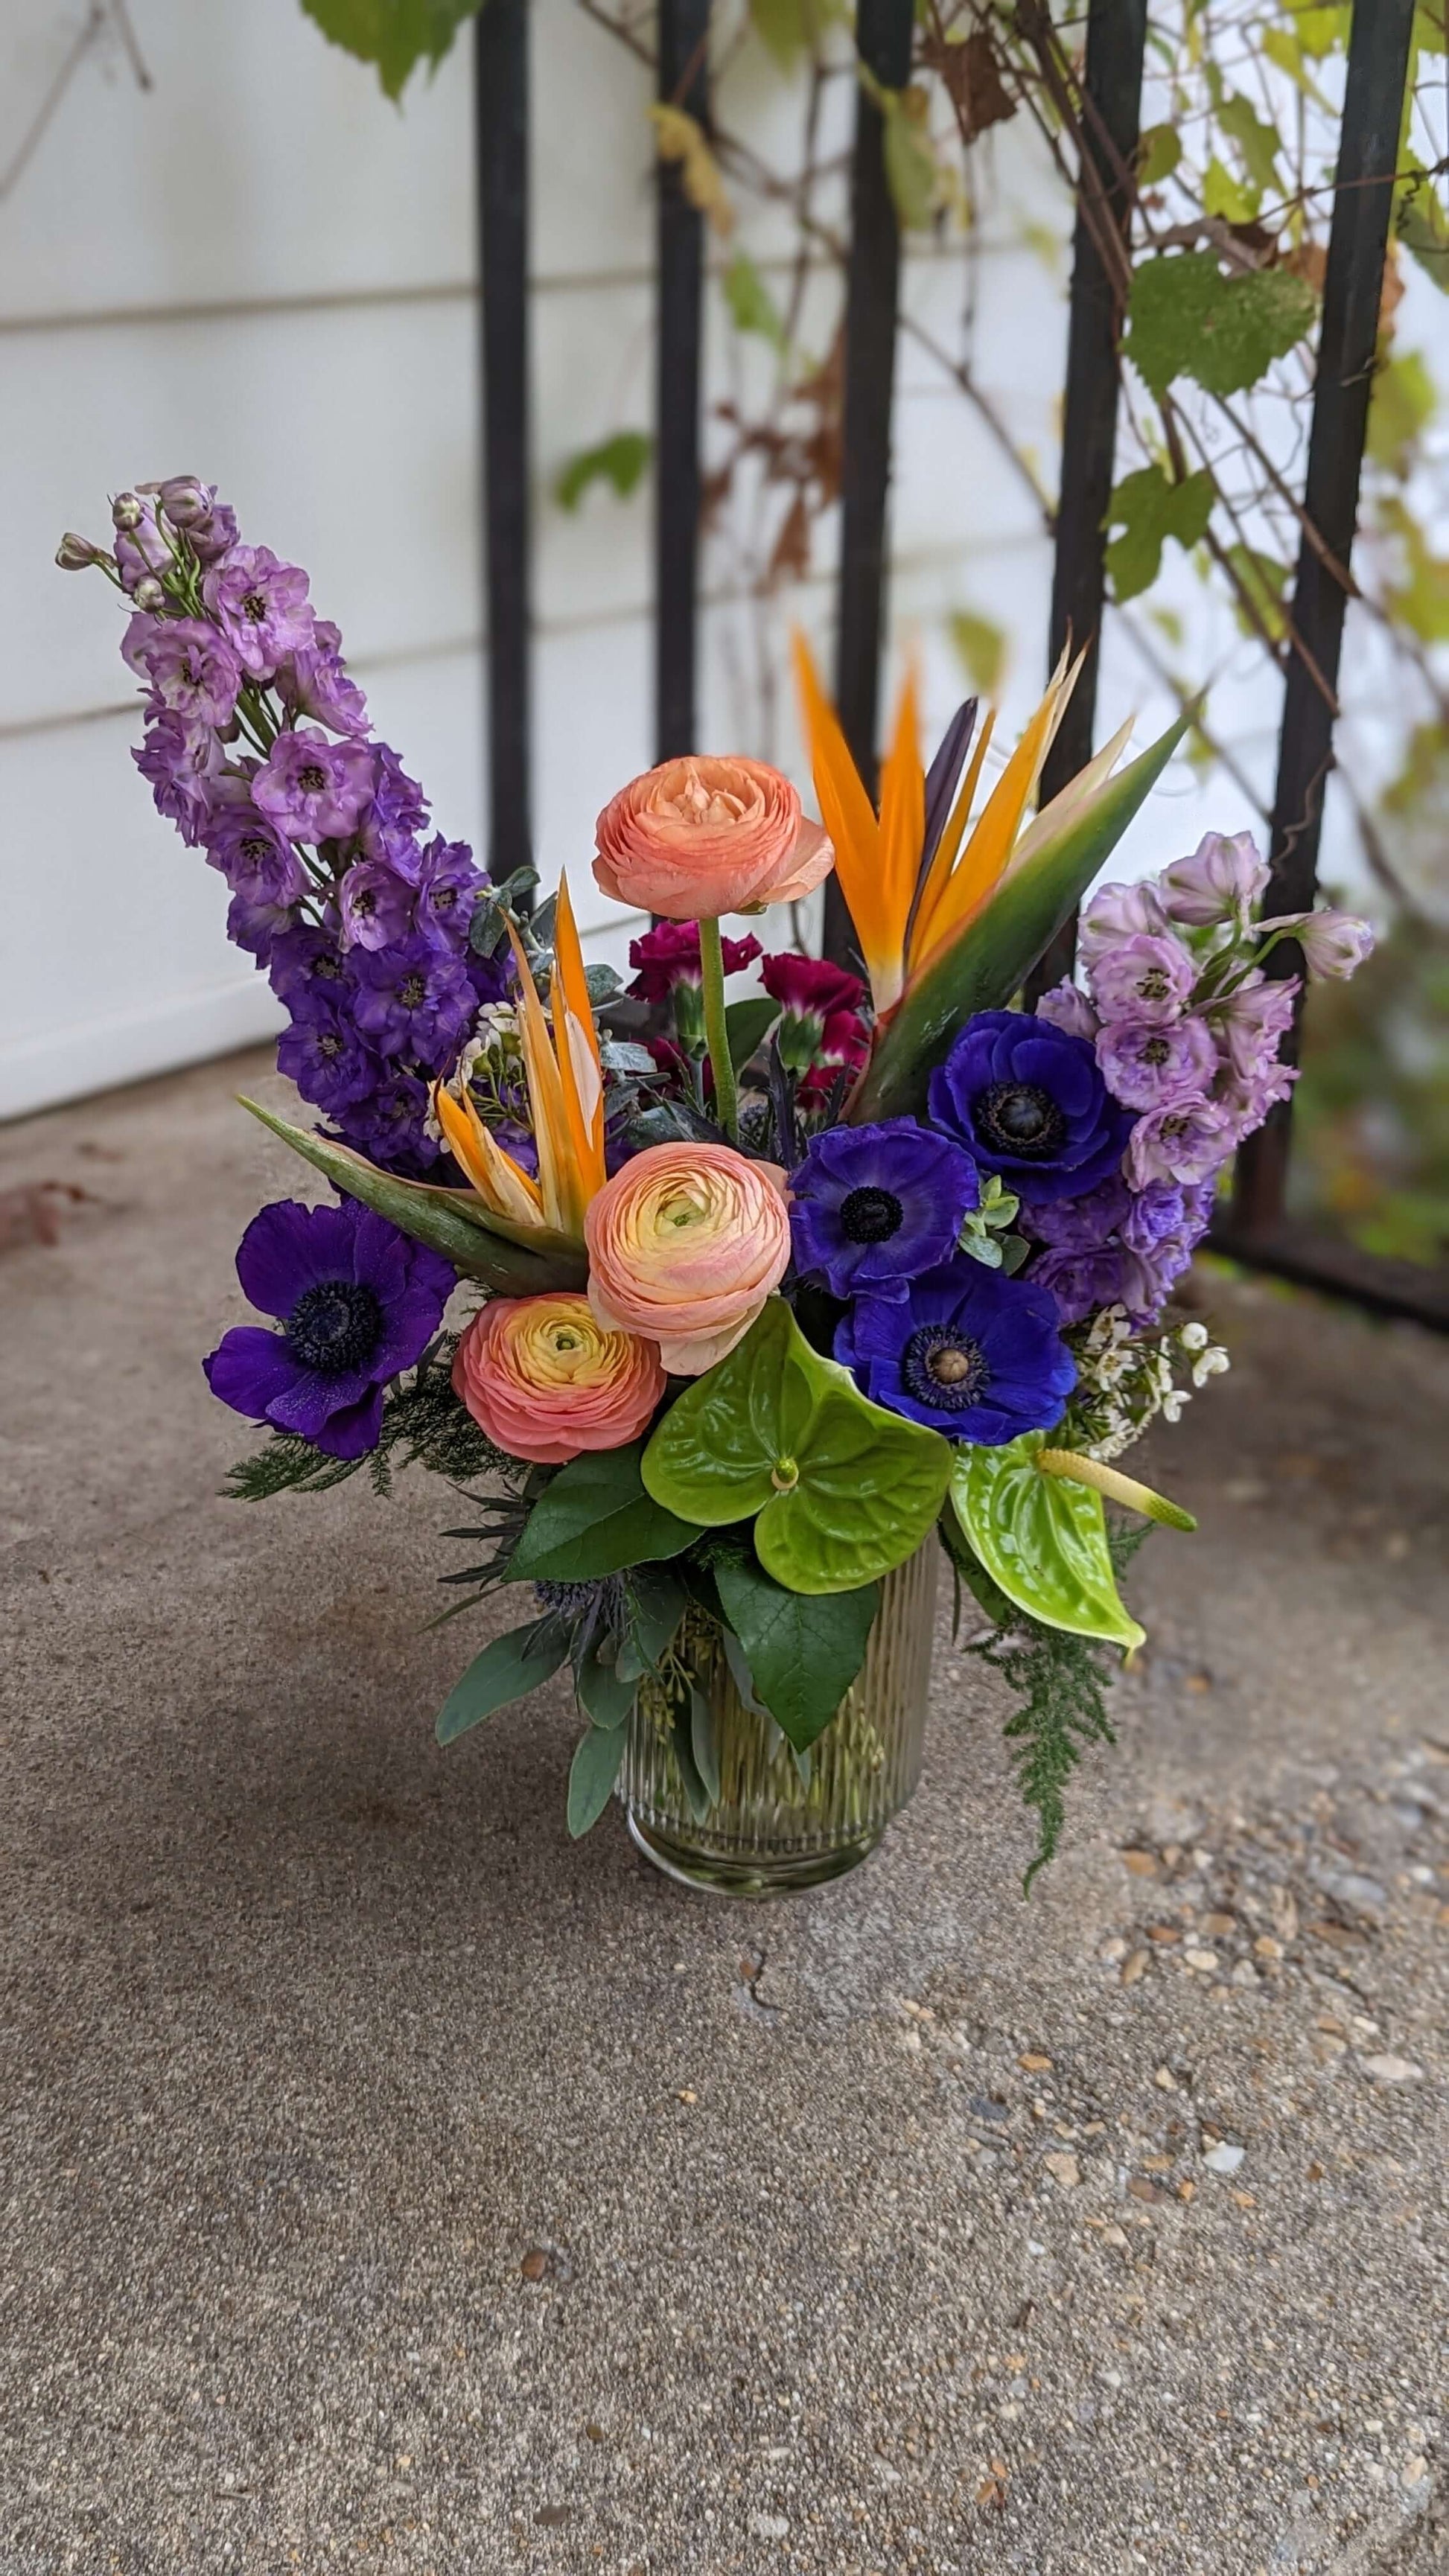 Tropical Delight
Bright tropical flowers arranged with complimentary flowers to bring vibrancy and life to any occasion.Please include flower and color preferences. Some colors or flowers may not be available for same day orders.
Flower arrangement
FloralsbyHeidiCatherine